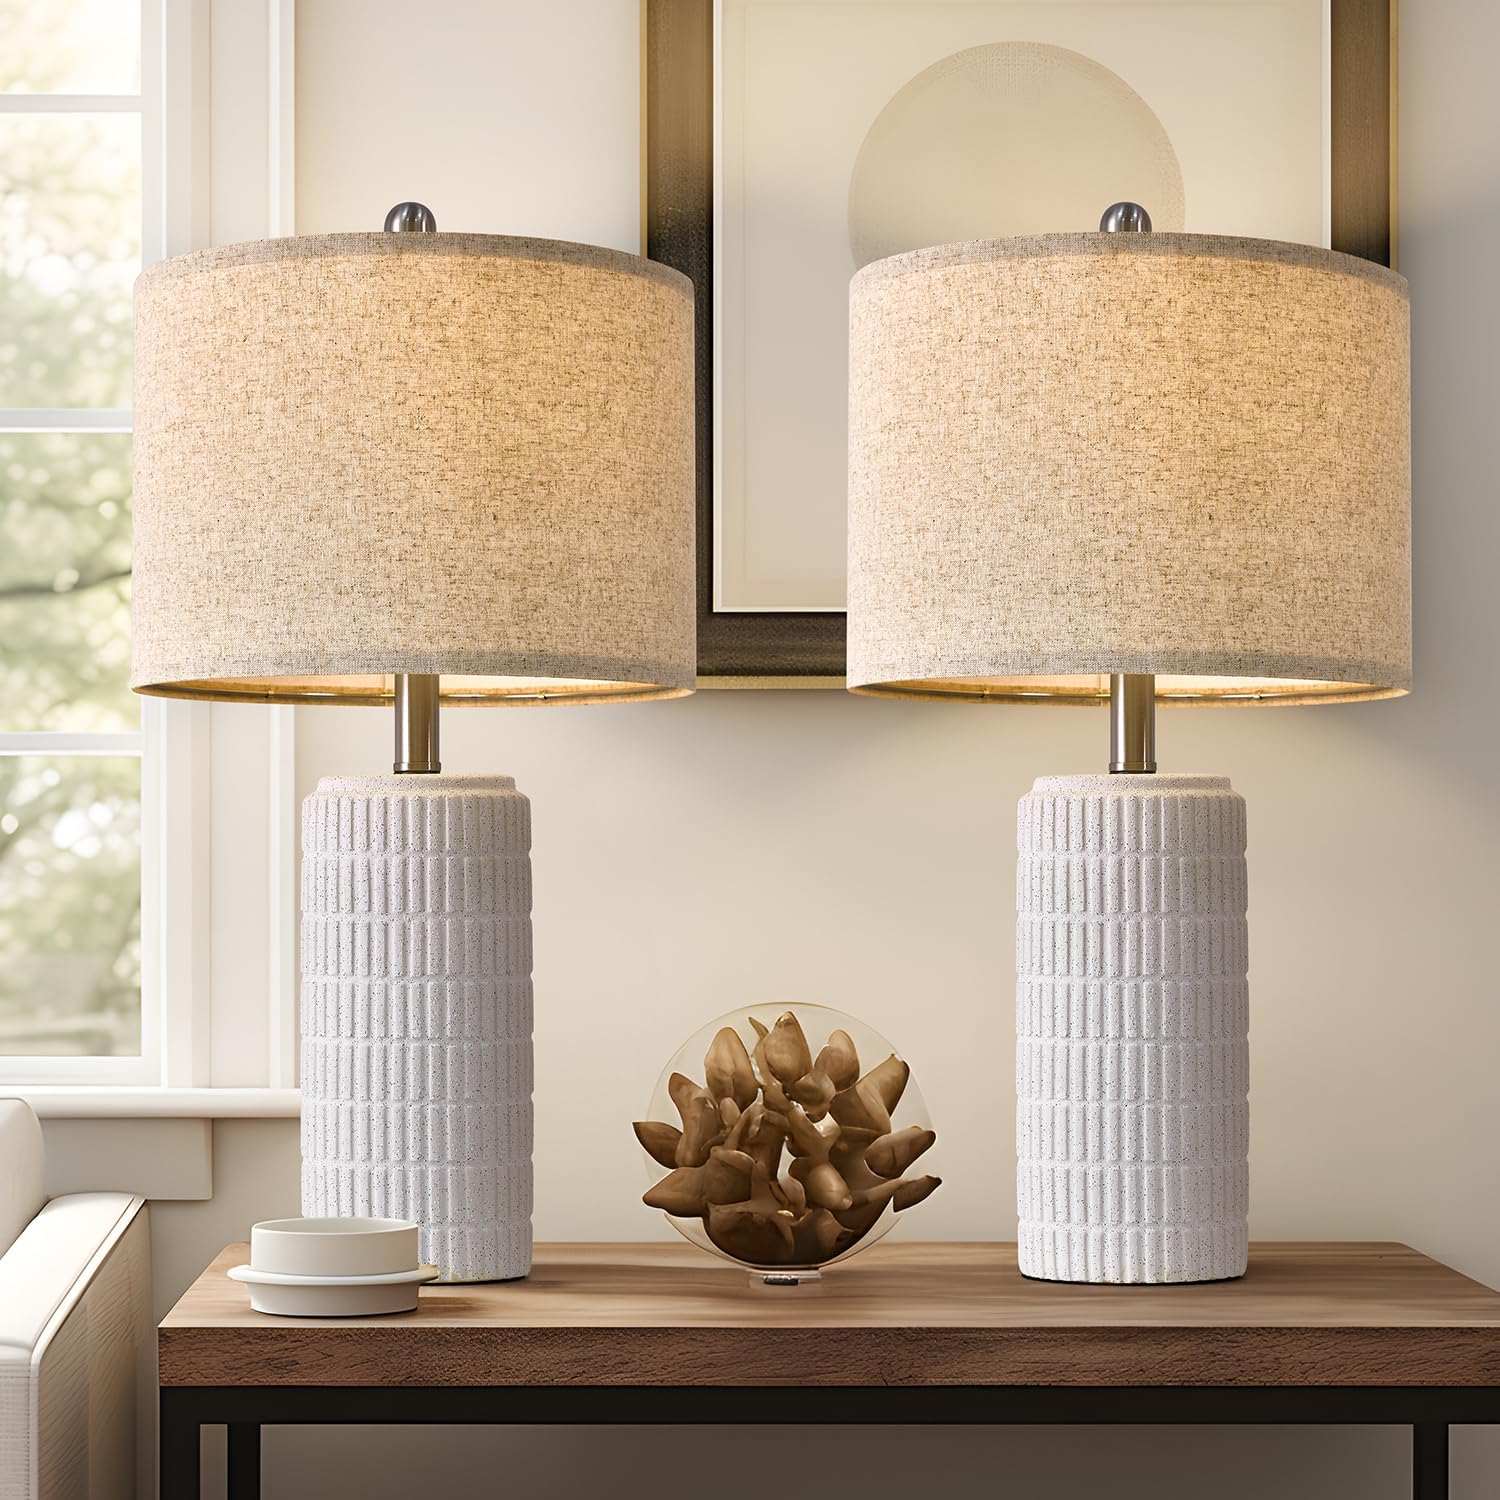 These lamps are so nice. Theyre taller than I expected, but not in a bad way. Theyre heavy and really great quality. The shade is white which I love, so many come with a yellowish off white shade that changes the lighting in the room. It comes with a 3 level bulb that makes the perfect brightness levels. I definitely recommend these lamps, such good quality for a super reasonable price.